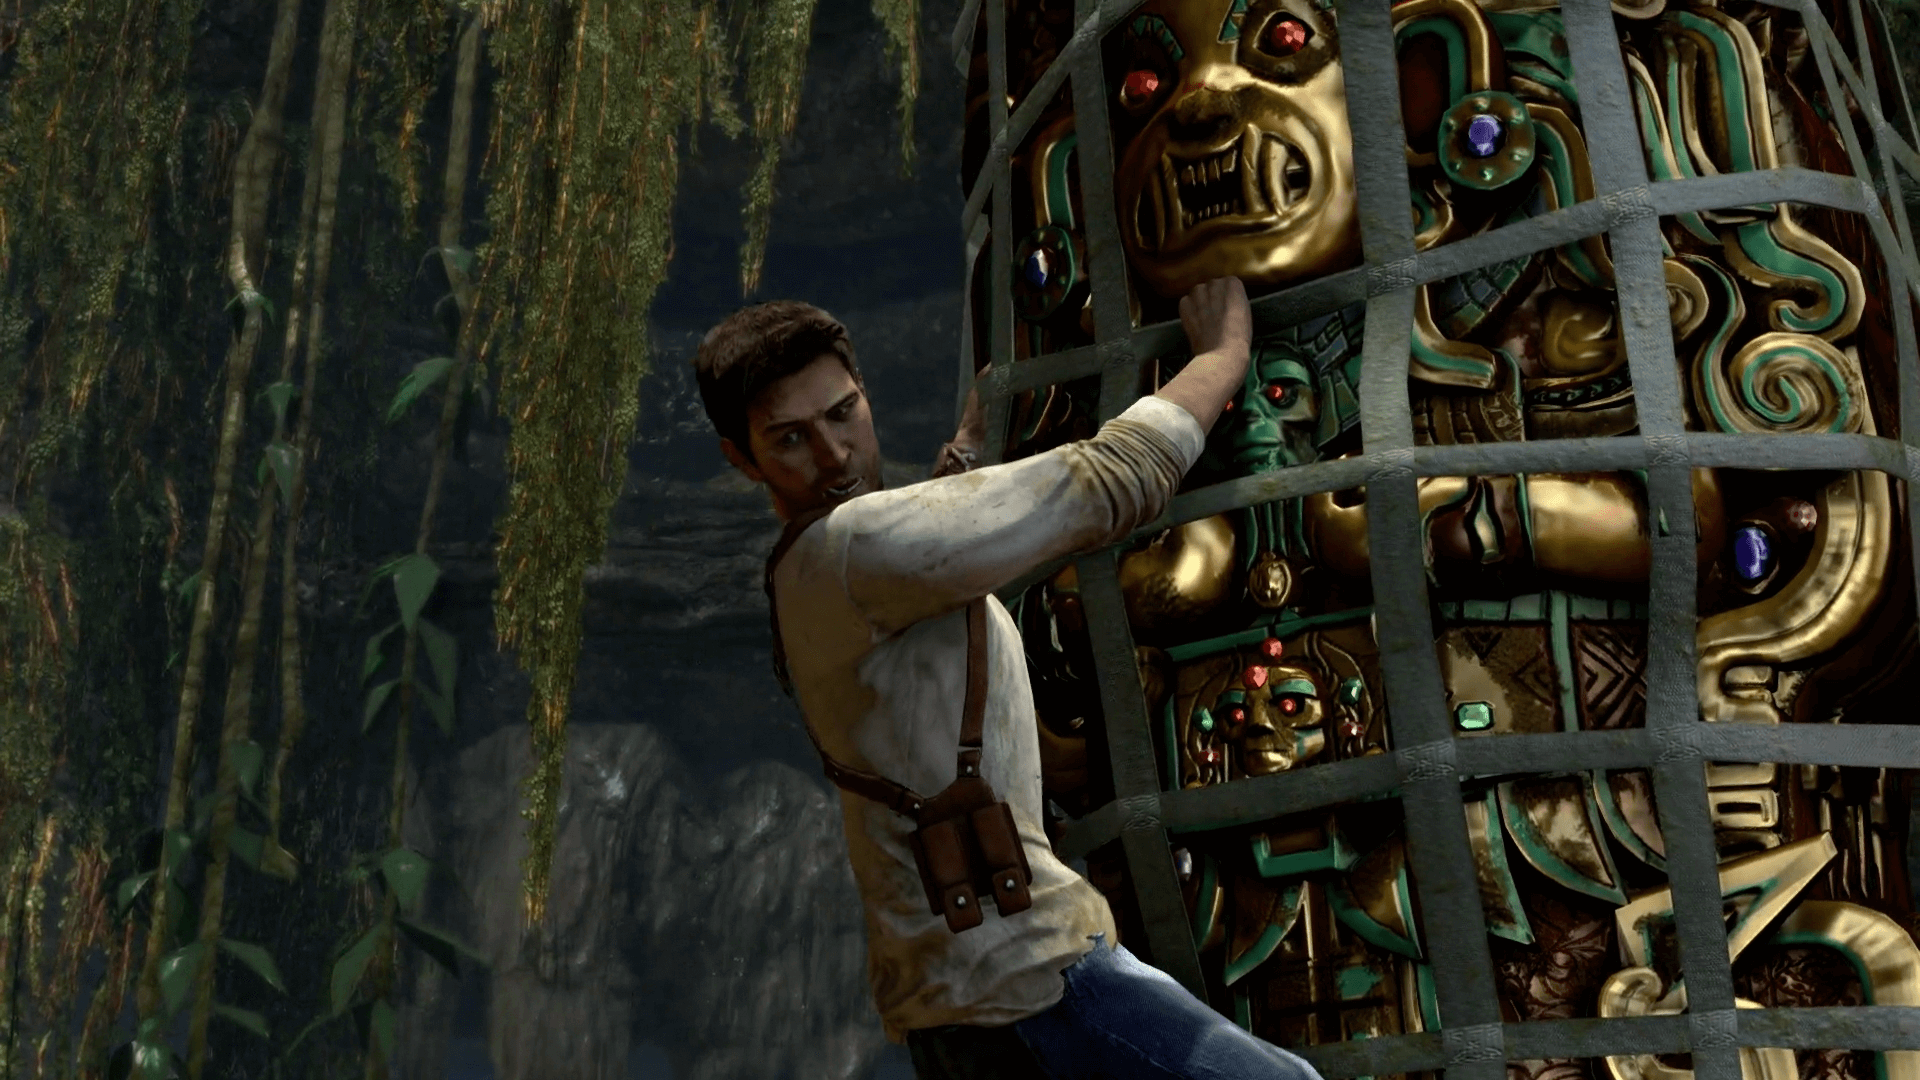 Nate in Uncharted